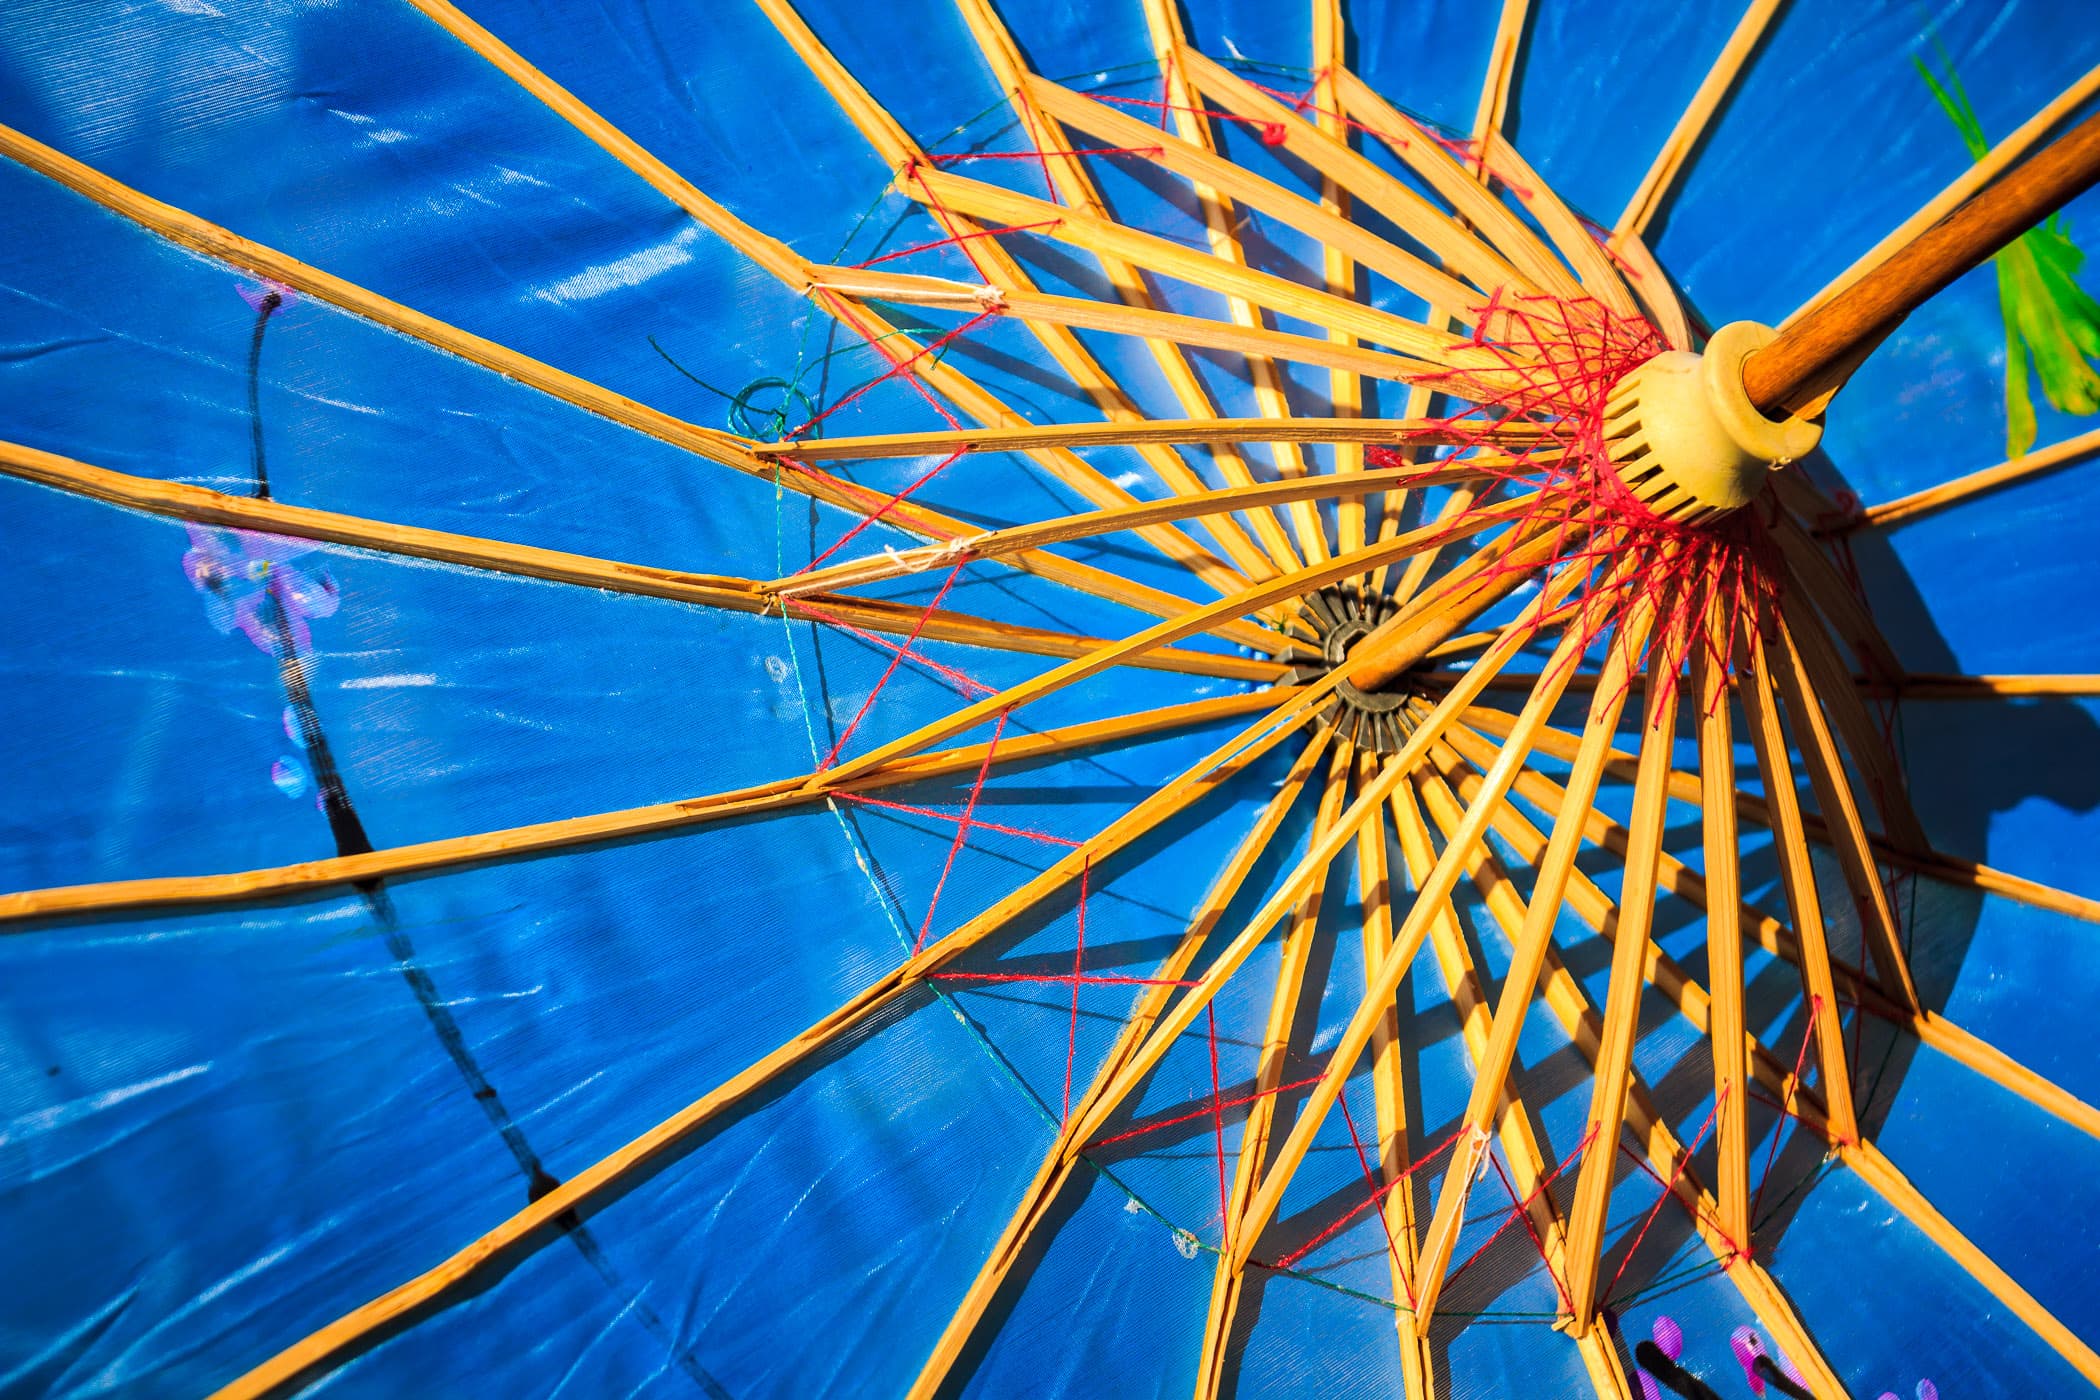 Detail of a Chinese parasol spotted at WorldFest, Addison, Texas.